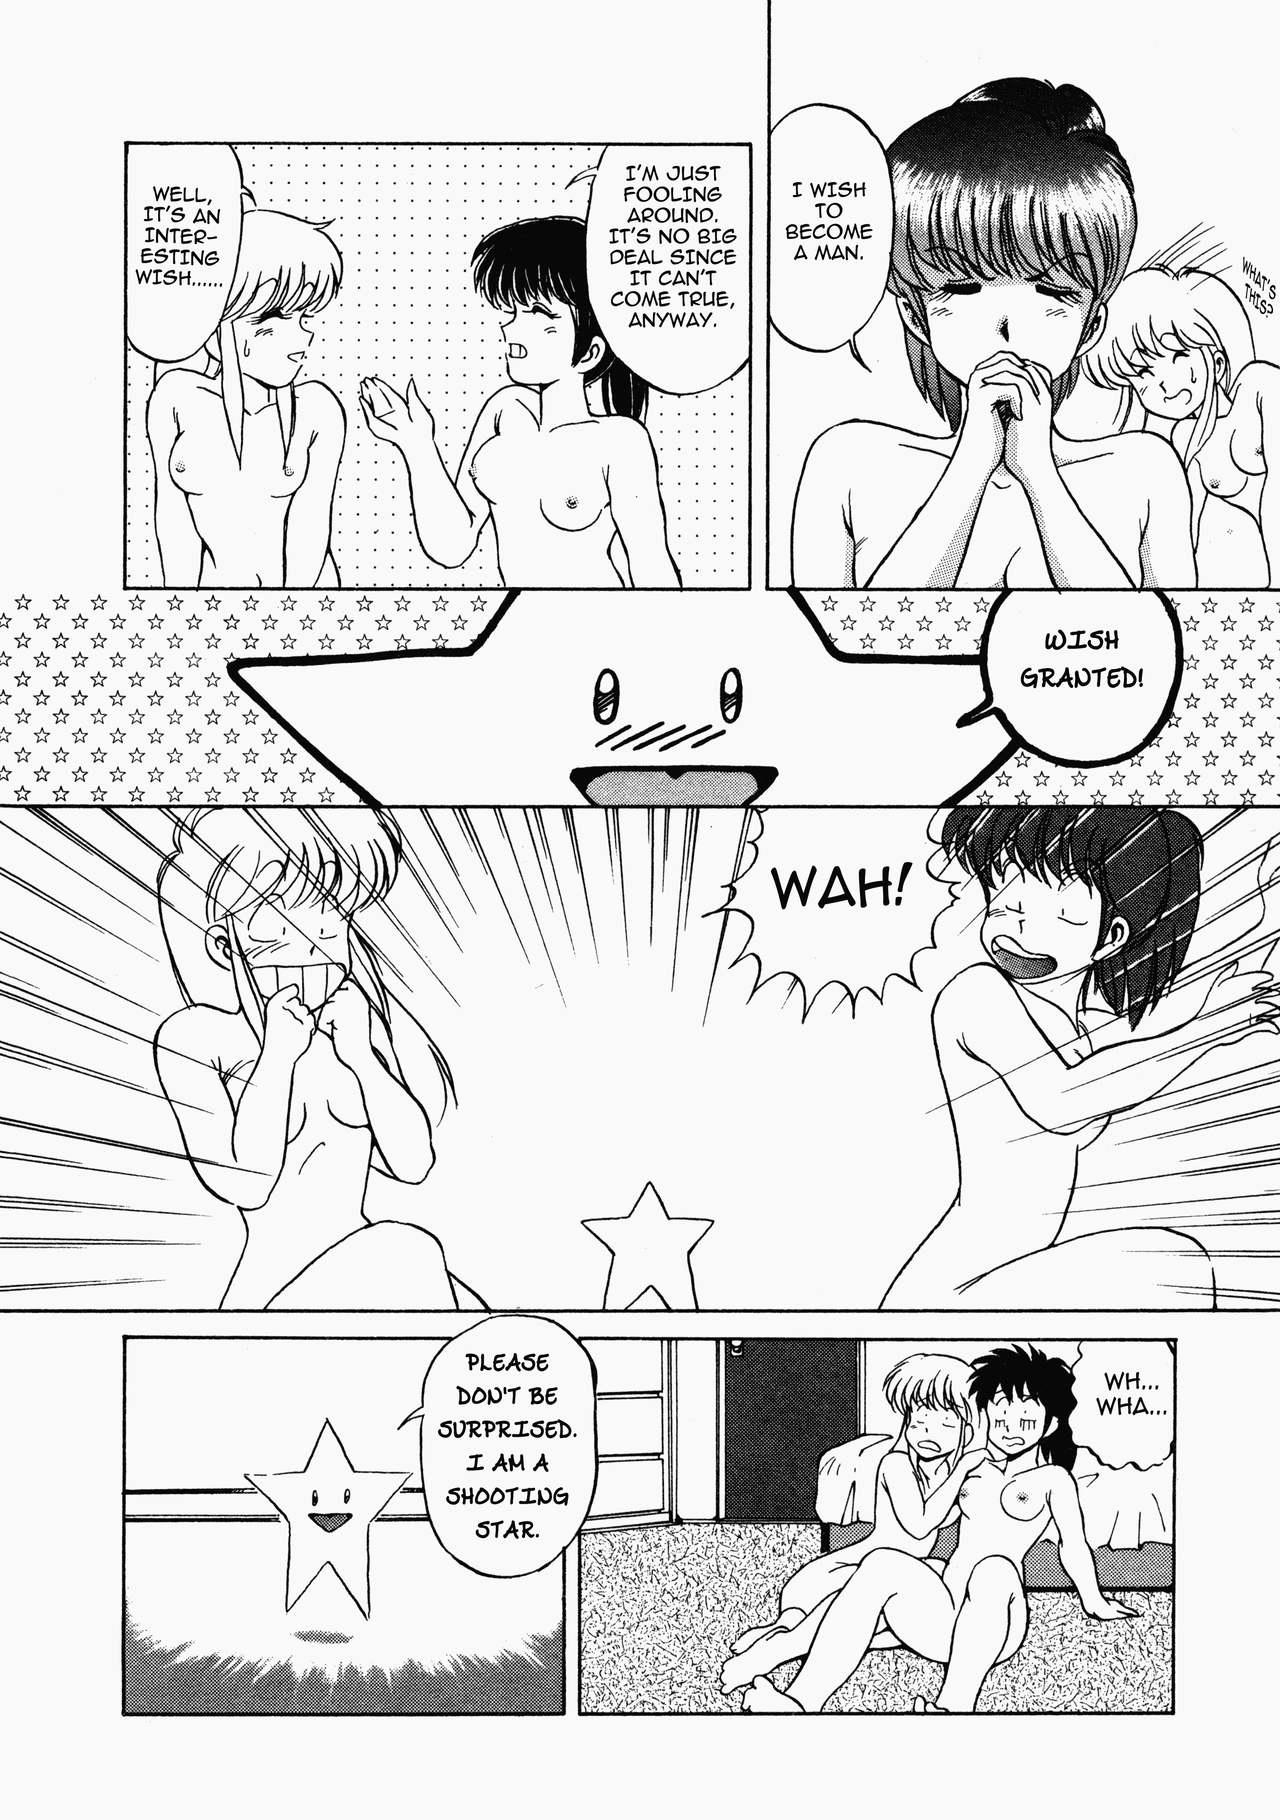 Amature Sex Tapes Happening STAR prologue + Act 1 - 2 Red - Page 10